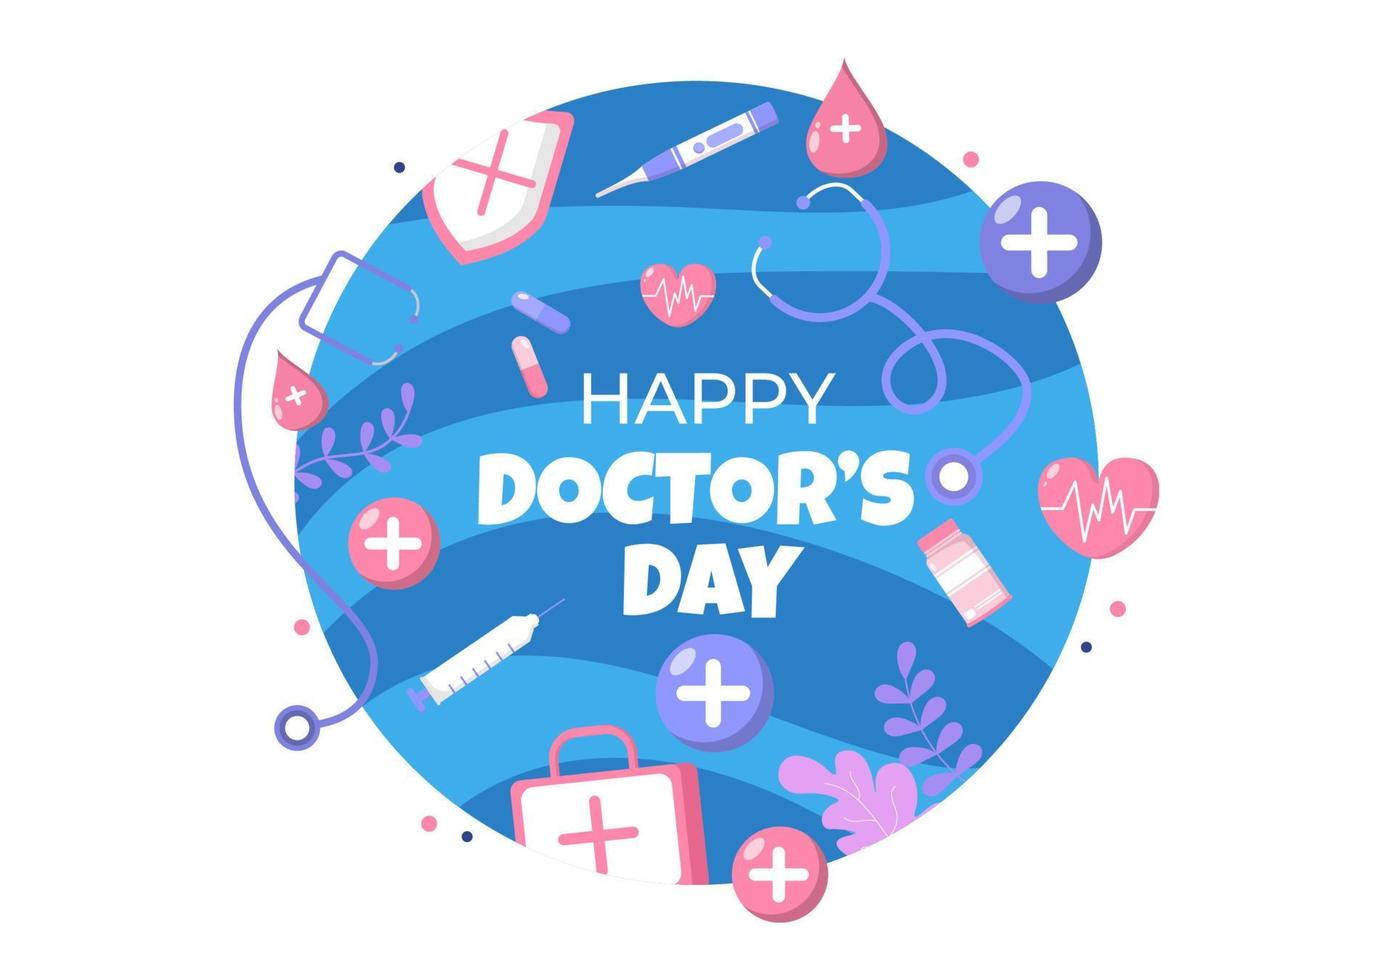 World Doctors Day Vector Illustration for Greeting Card, Poster or ...